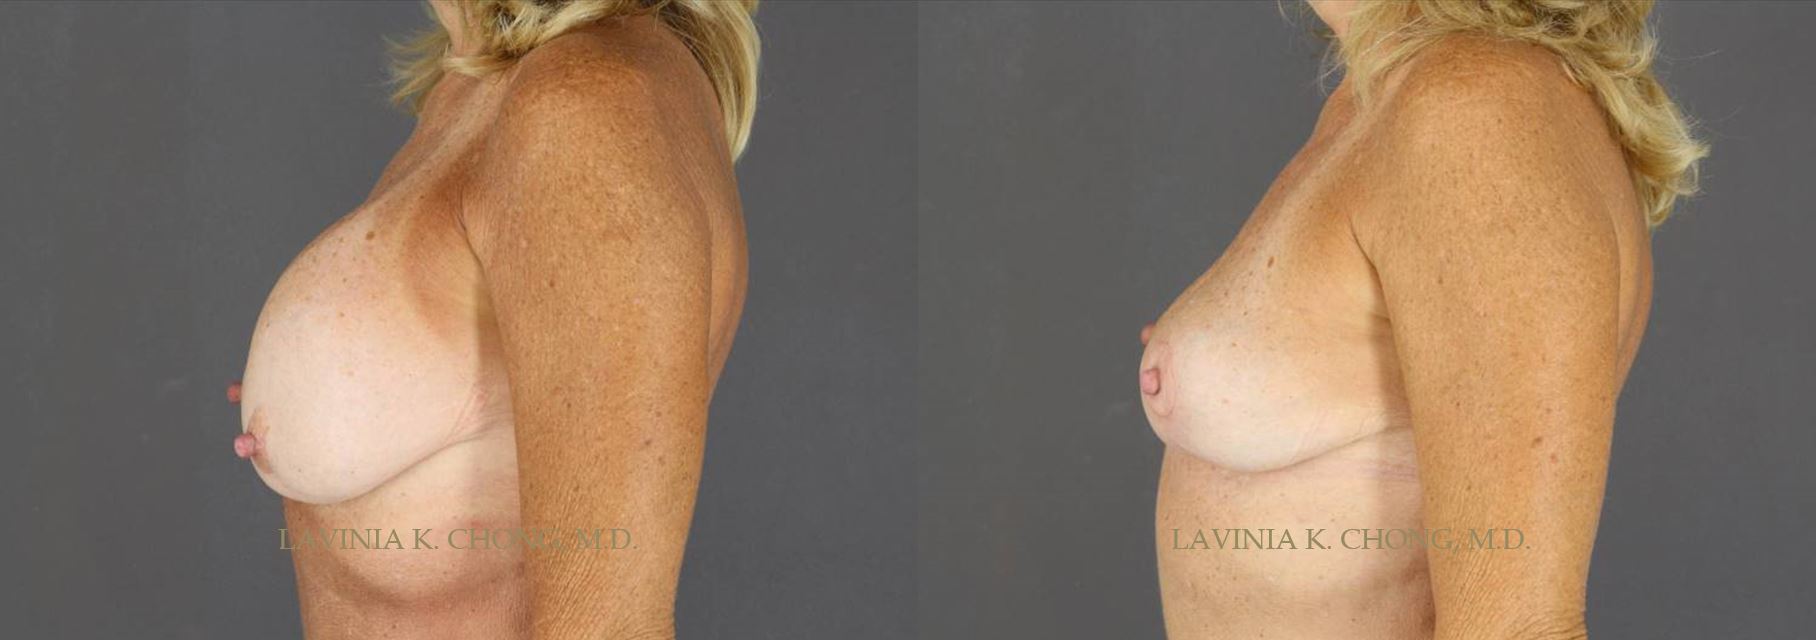 Before and After photo of 63 yr old desiring smaller lifted breast. Surgical plan includes Explantation of Allergan Silicone Breast Implants with Application of DuraSorb and Autogenous Fat Grafting to the Breast by female plastic surgeon in Newport Beach, California.